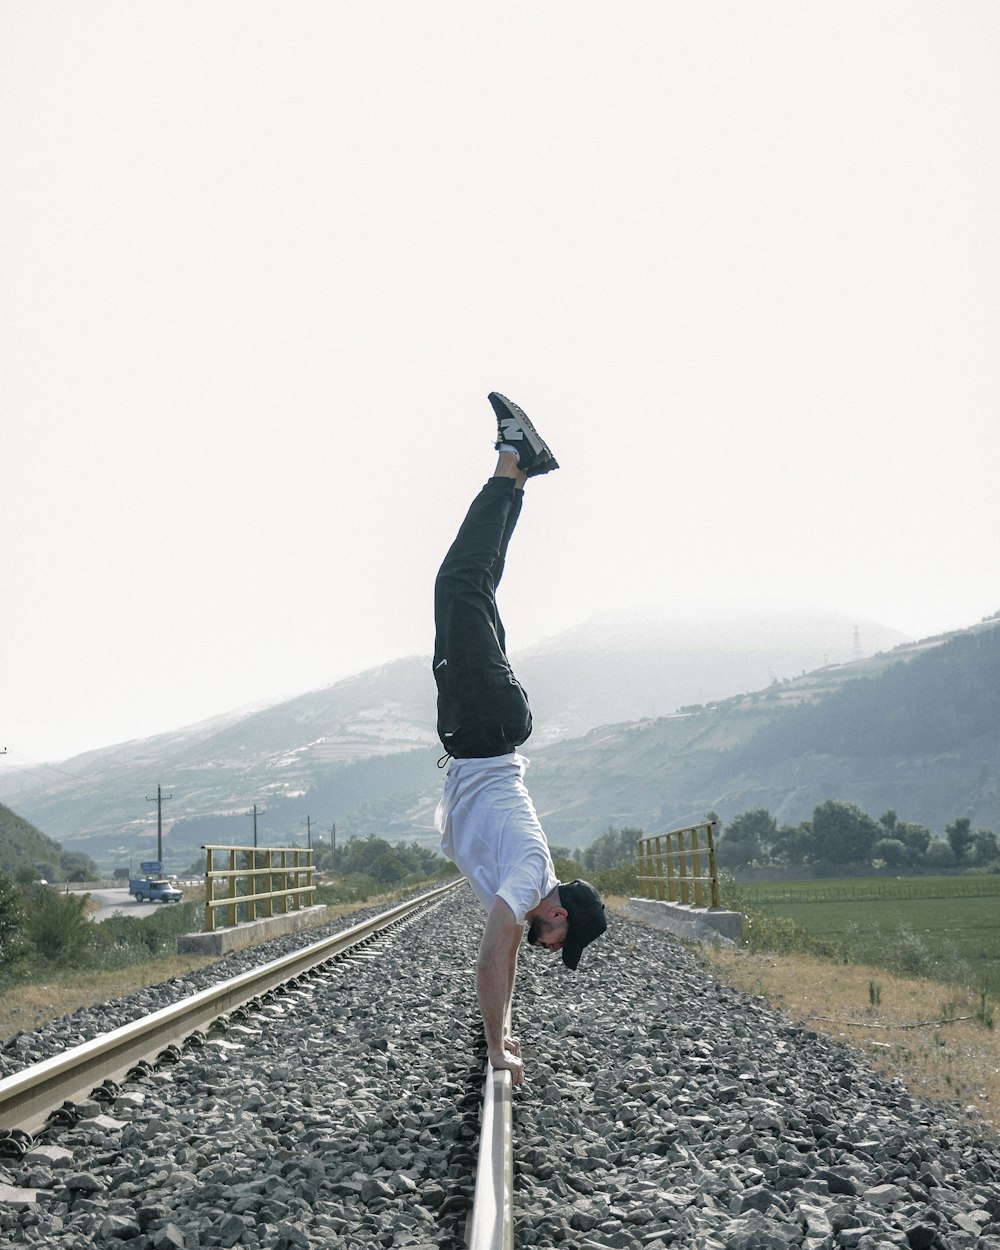 a man doing a handstand on a train track